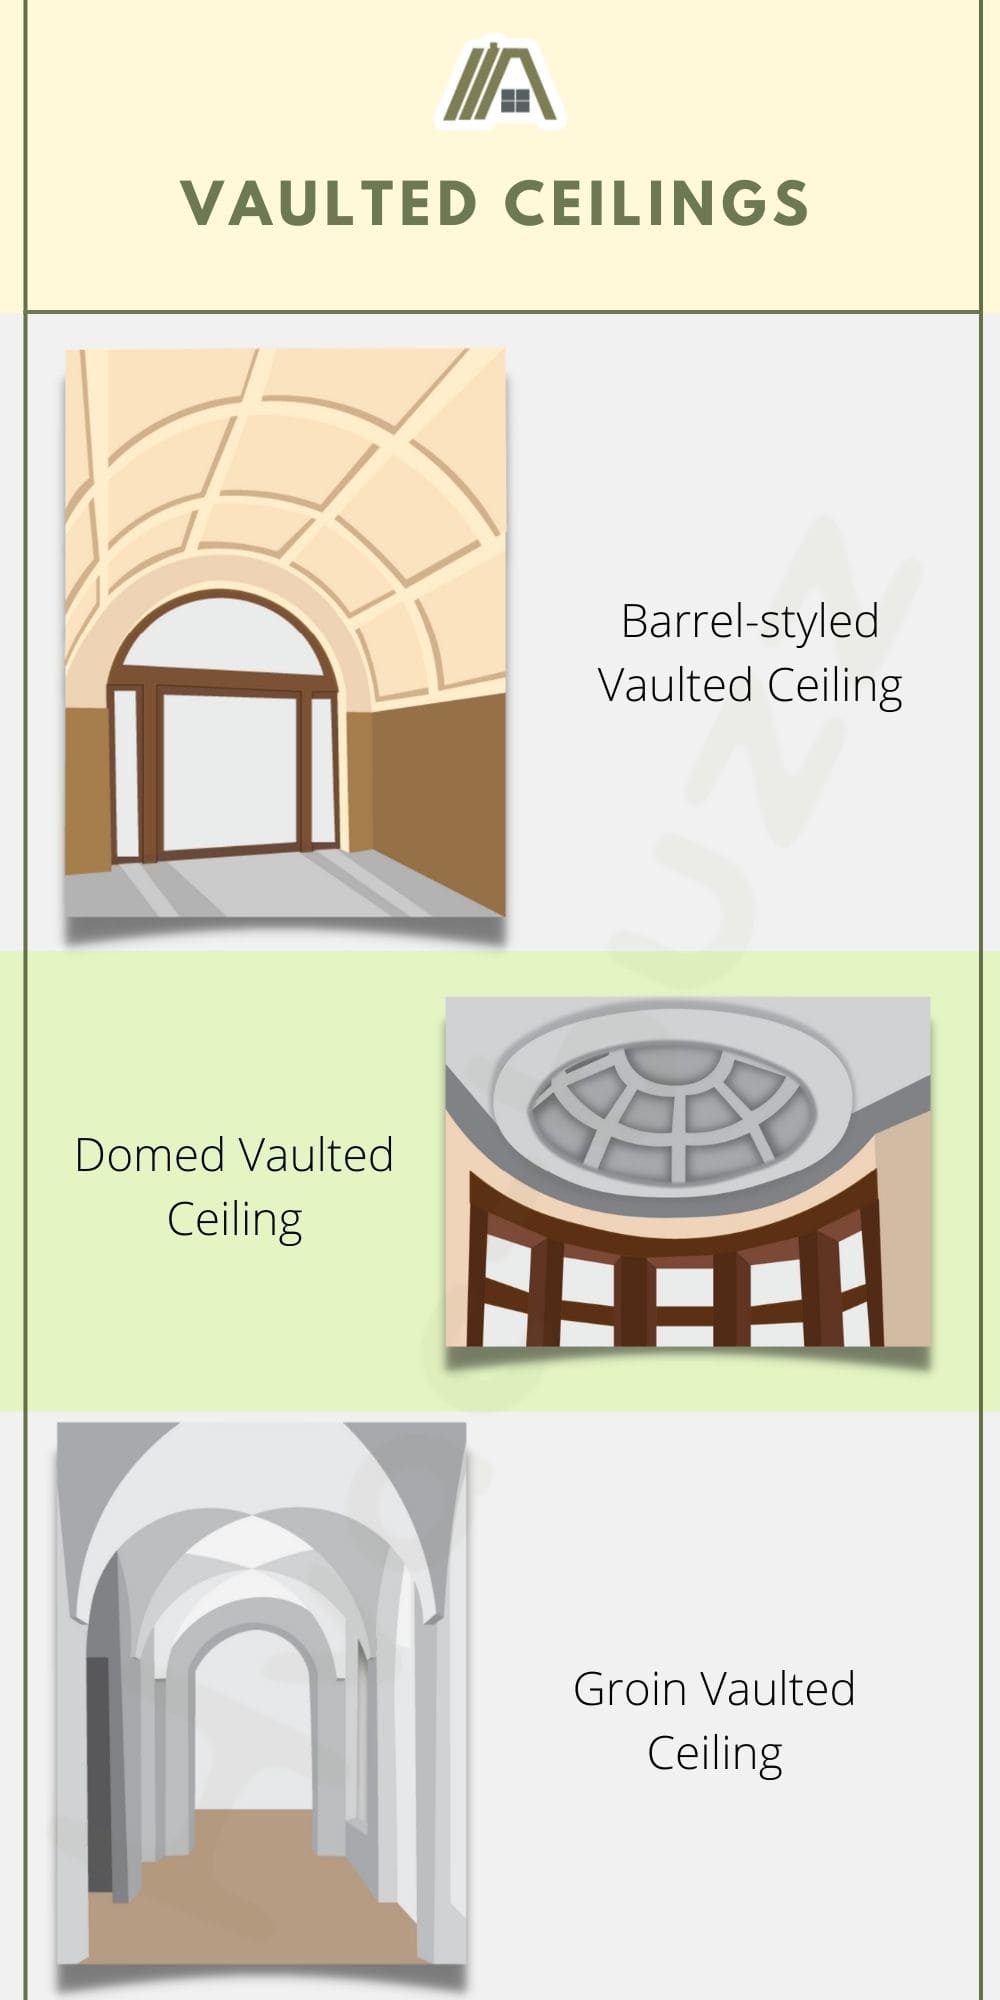 Illustrations of Vaulted Ceilings: Barrel-styled vaulted ceiling, domed vaulted ceiling and groin vaulted ceiling